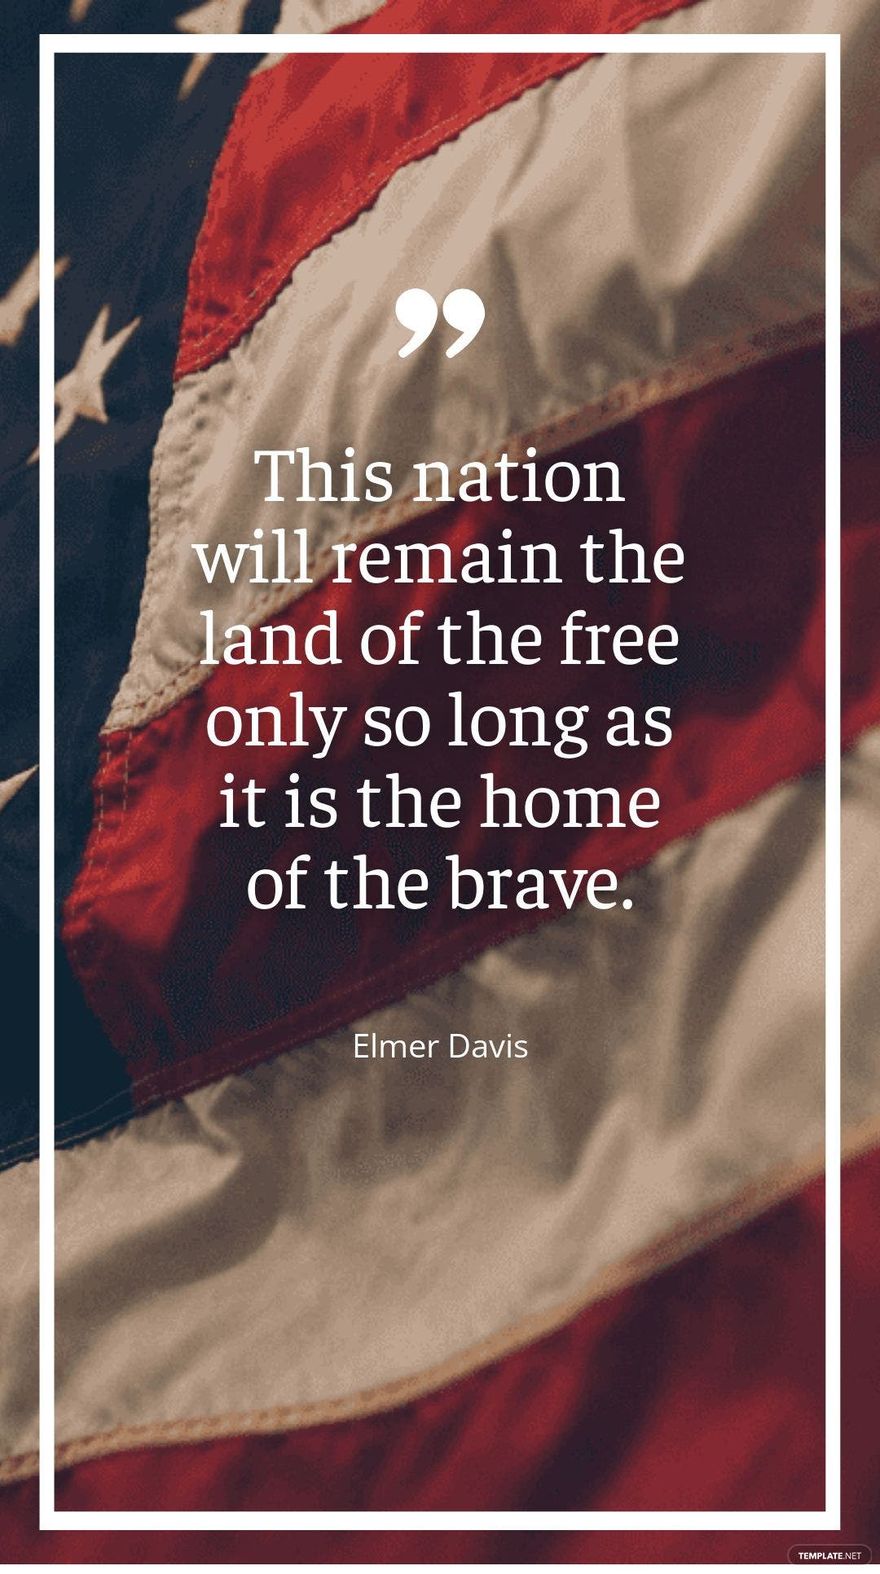 Free Elmer Davis - “This nation will remain the land of the only so long as it is the home of the brave.” in JPG